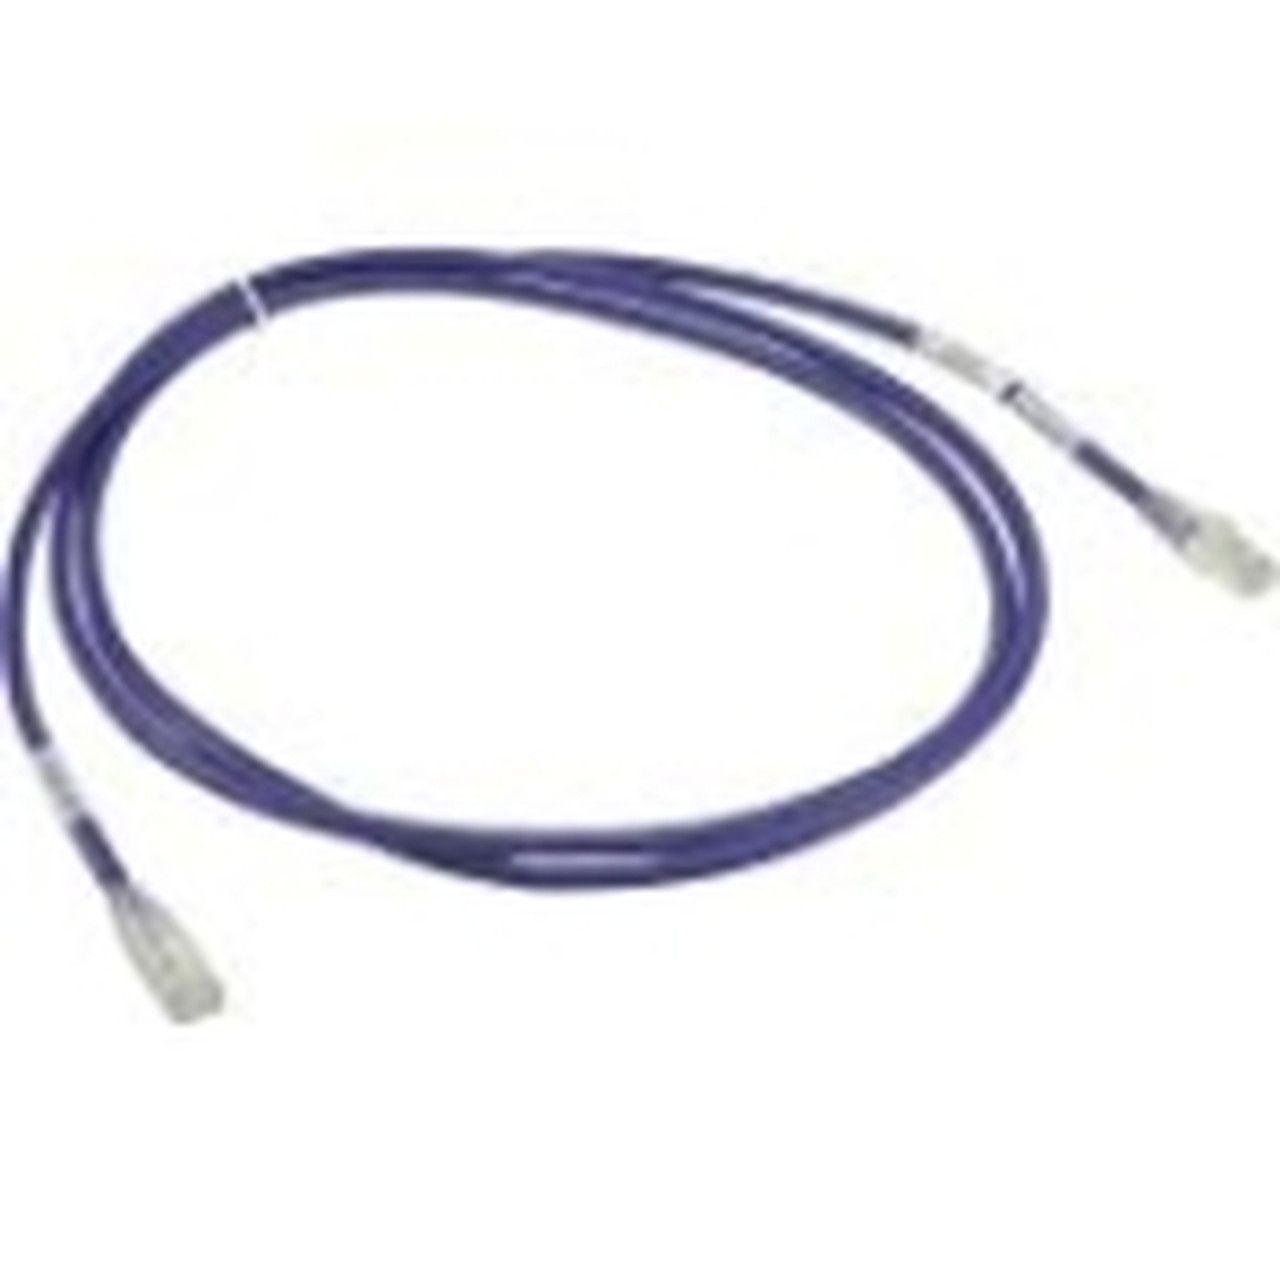 CBL-C6A-PU2M Supermicro 10G RJ45 CAT6A 2m Purple Cable Category 6a for Switch Network Device Server 1.25 GB/s 6.56 ft 1 x RJ-45 Male Network 1 x RJ-